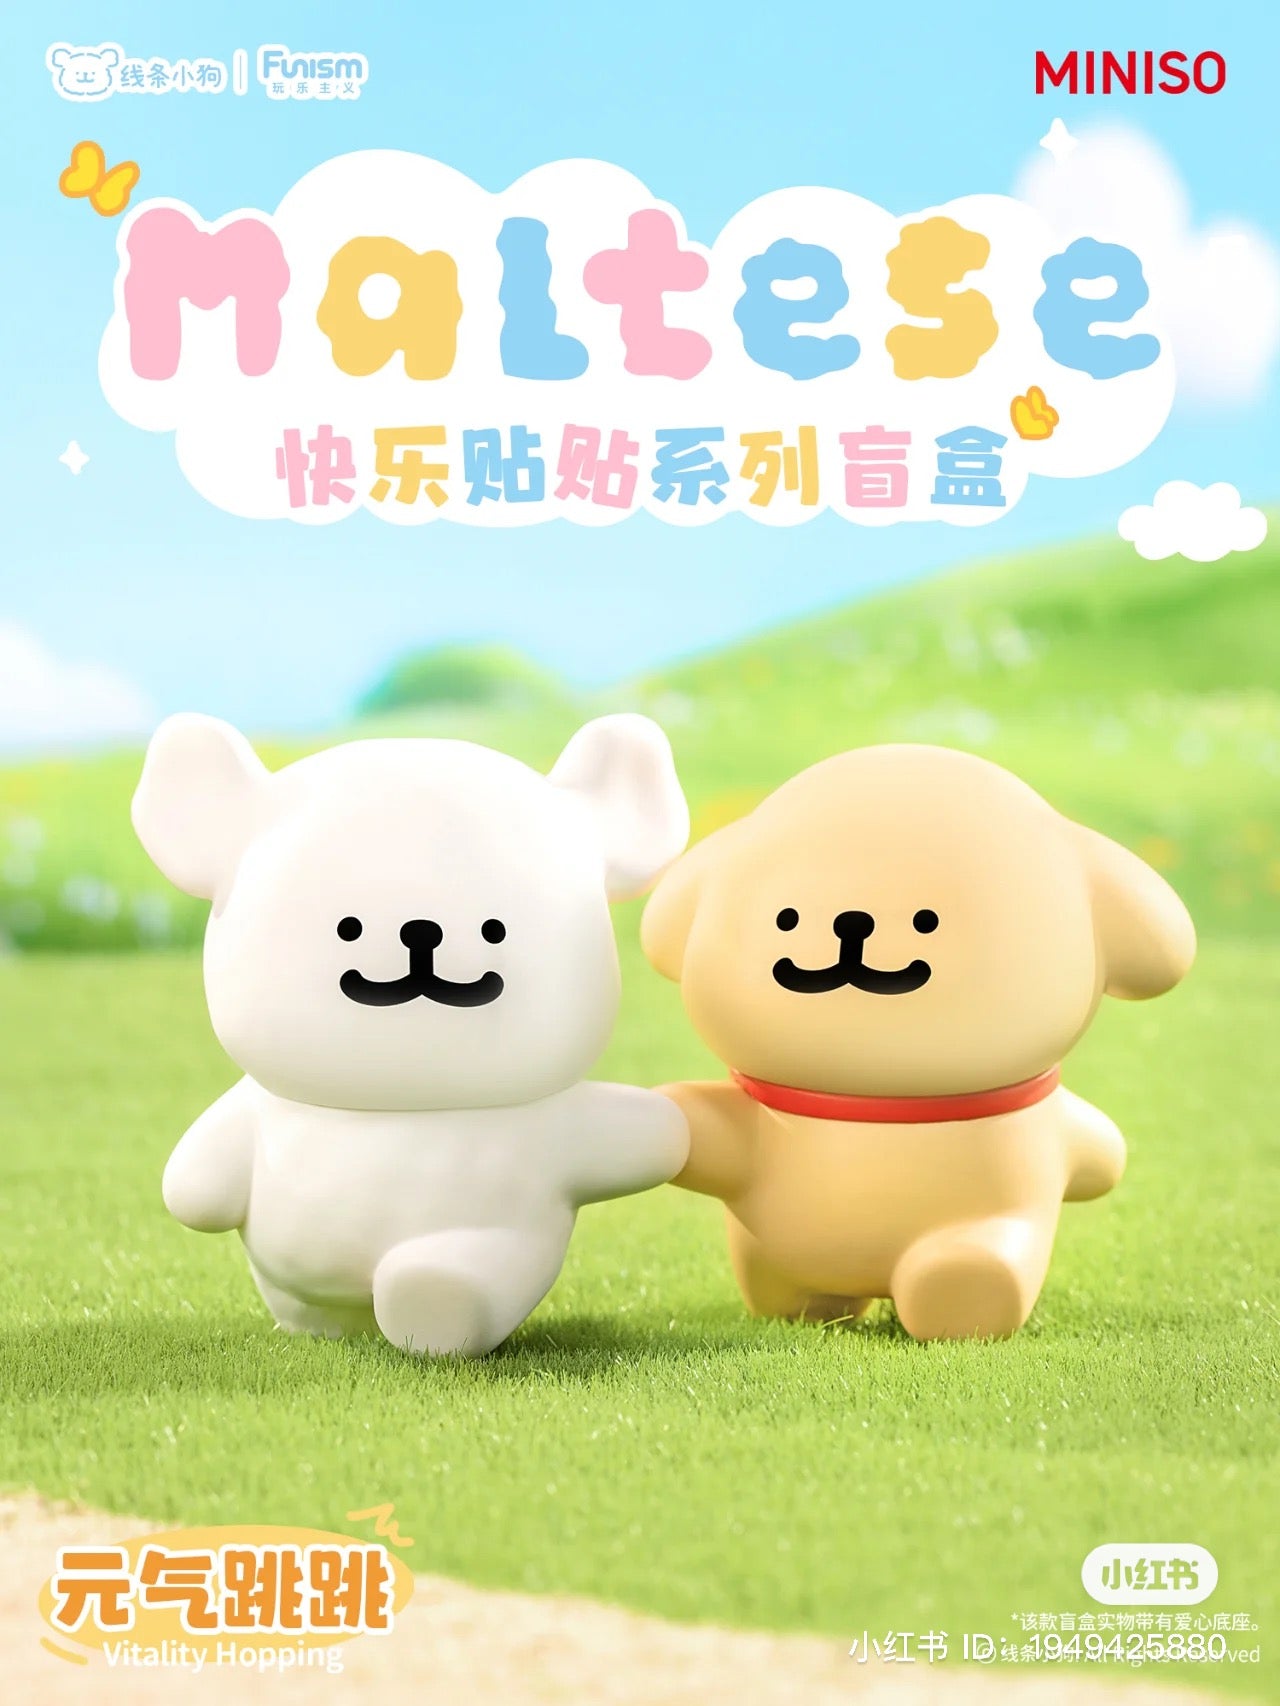 Maltese Happy Snuggling Blind Box Series: 6 regular designs, 1 secret. Toy dogs on grass, white animal with mustache, small dog toy. From Strangecat Toys, a blind box and art toy store.